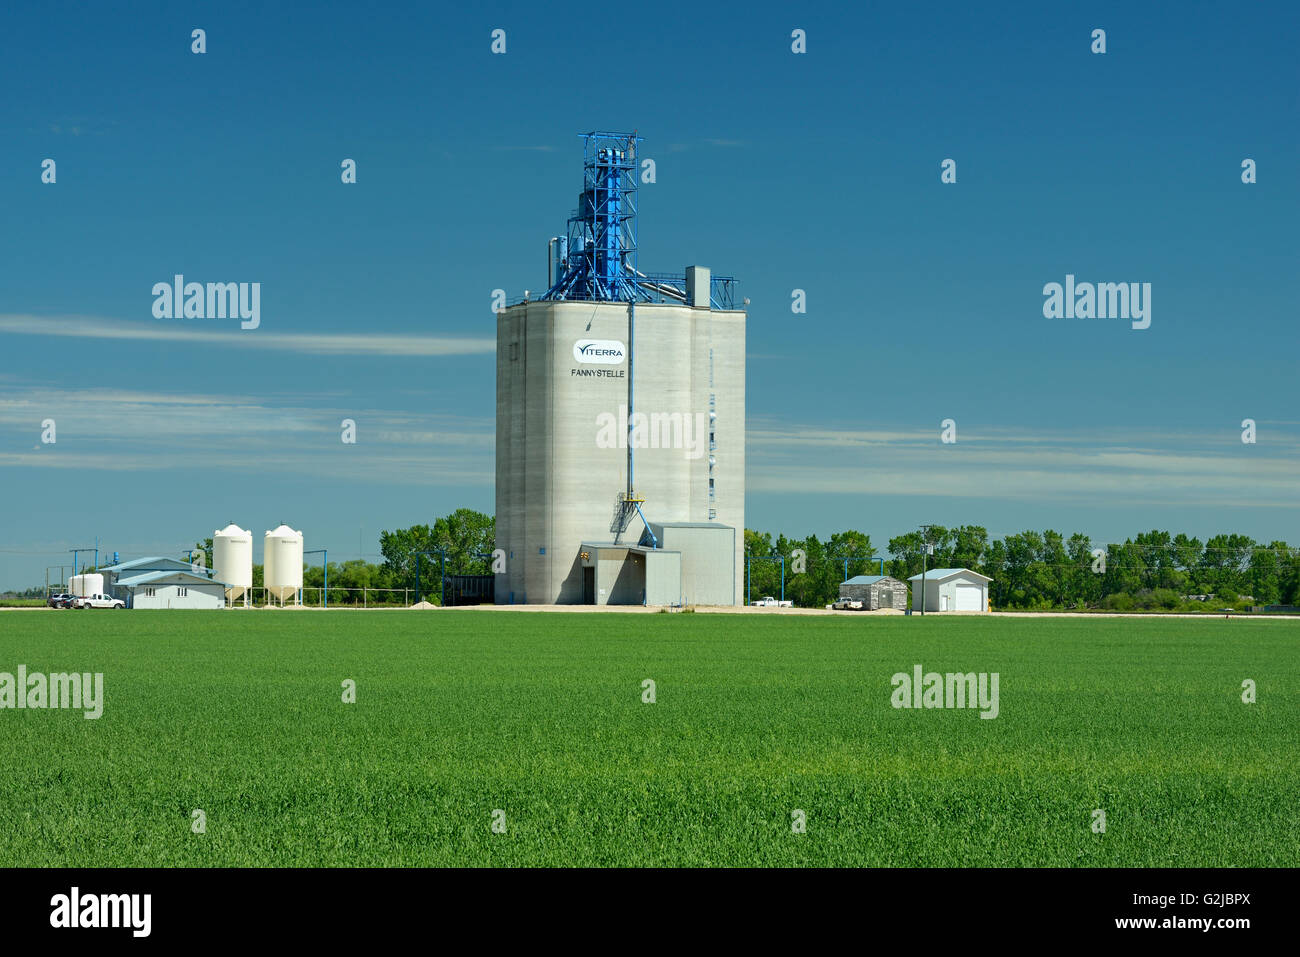 Hightroughput grain elevator and young cereal crop, Fannystelle, Manitoba, Canada Stock Photo